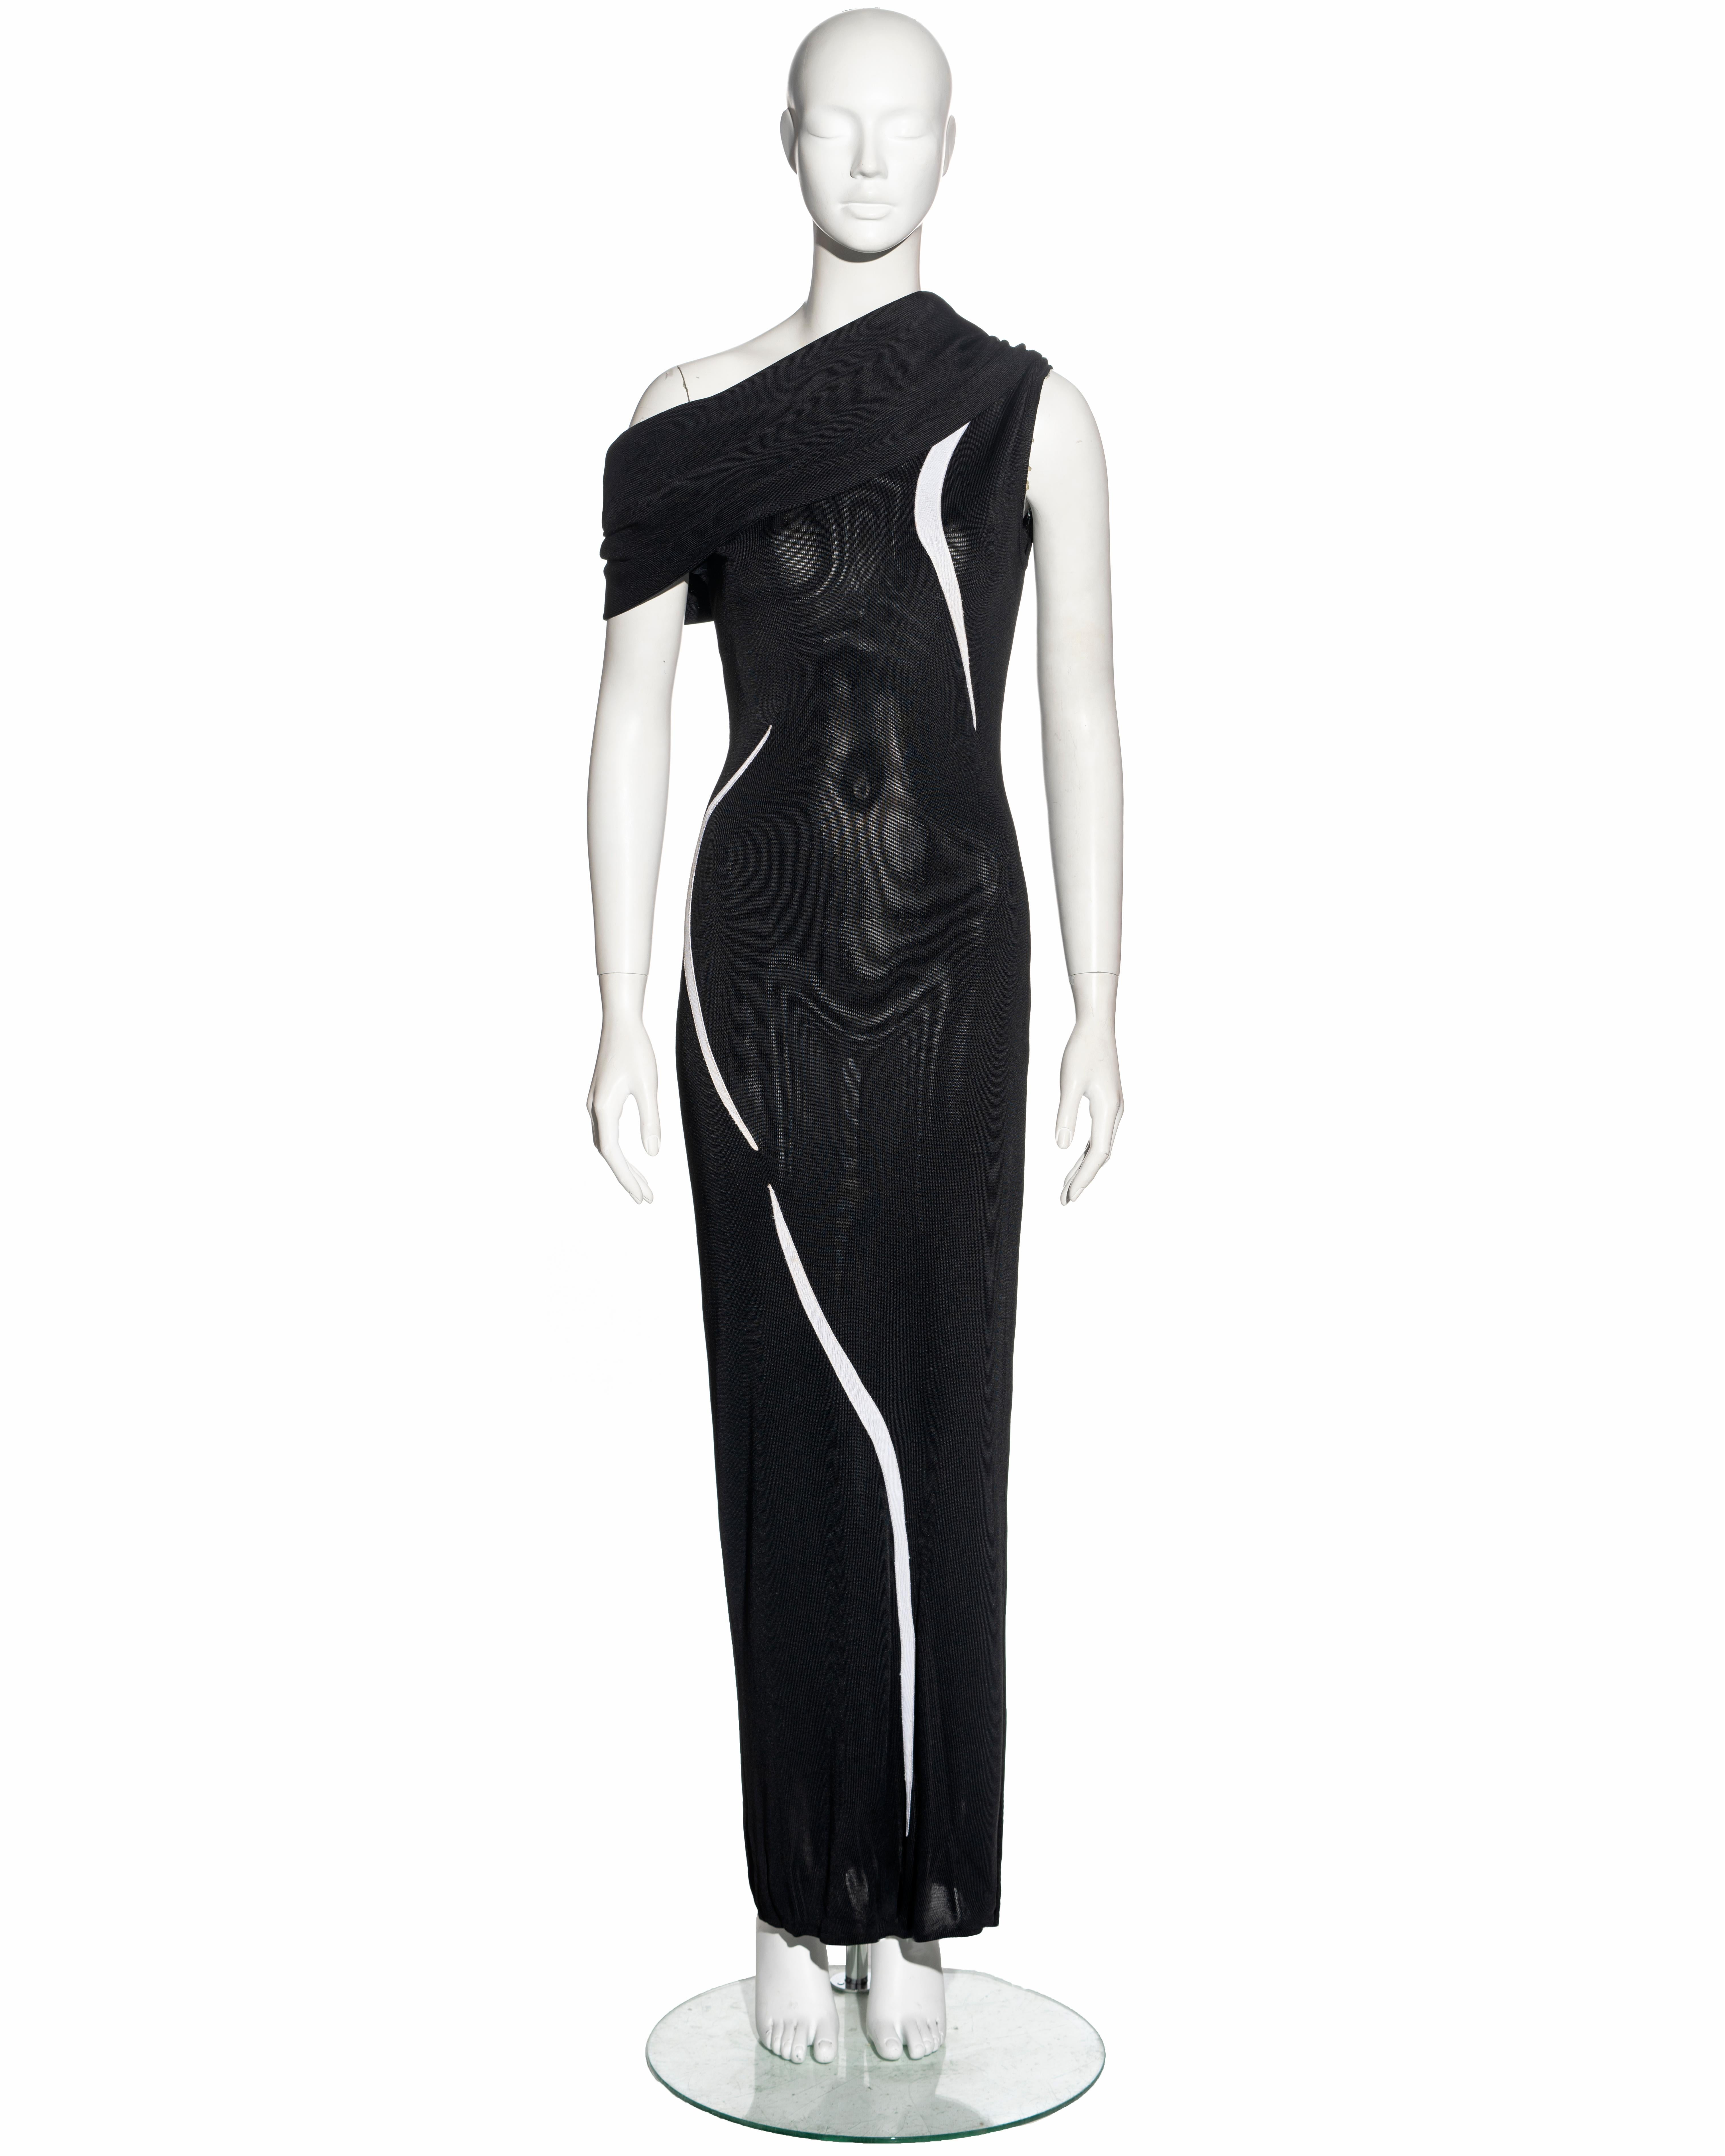 ▪ Thierry Mugler evening dress
▪ Sold by One of a Kind Archive
▪ Constructed from black knitted rayon 
▪ Inserts of white curved lines 
▪ Asymmetric off-shoulder neckline with draped cowl 
▪ Floor-length skirt with leg slit 
▪ Size: FR 38 - UK 10 -